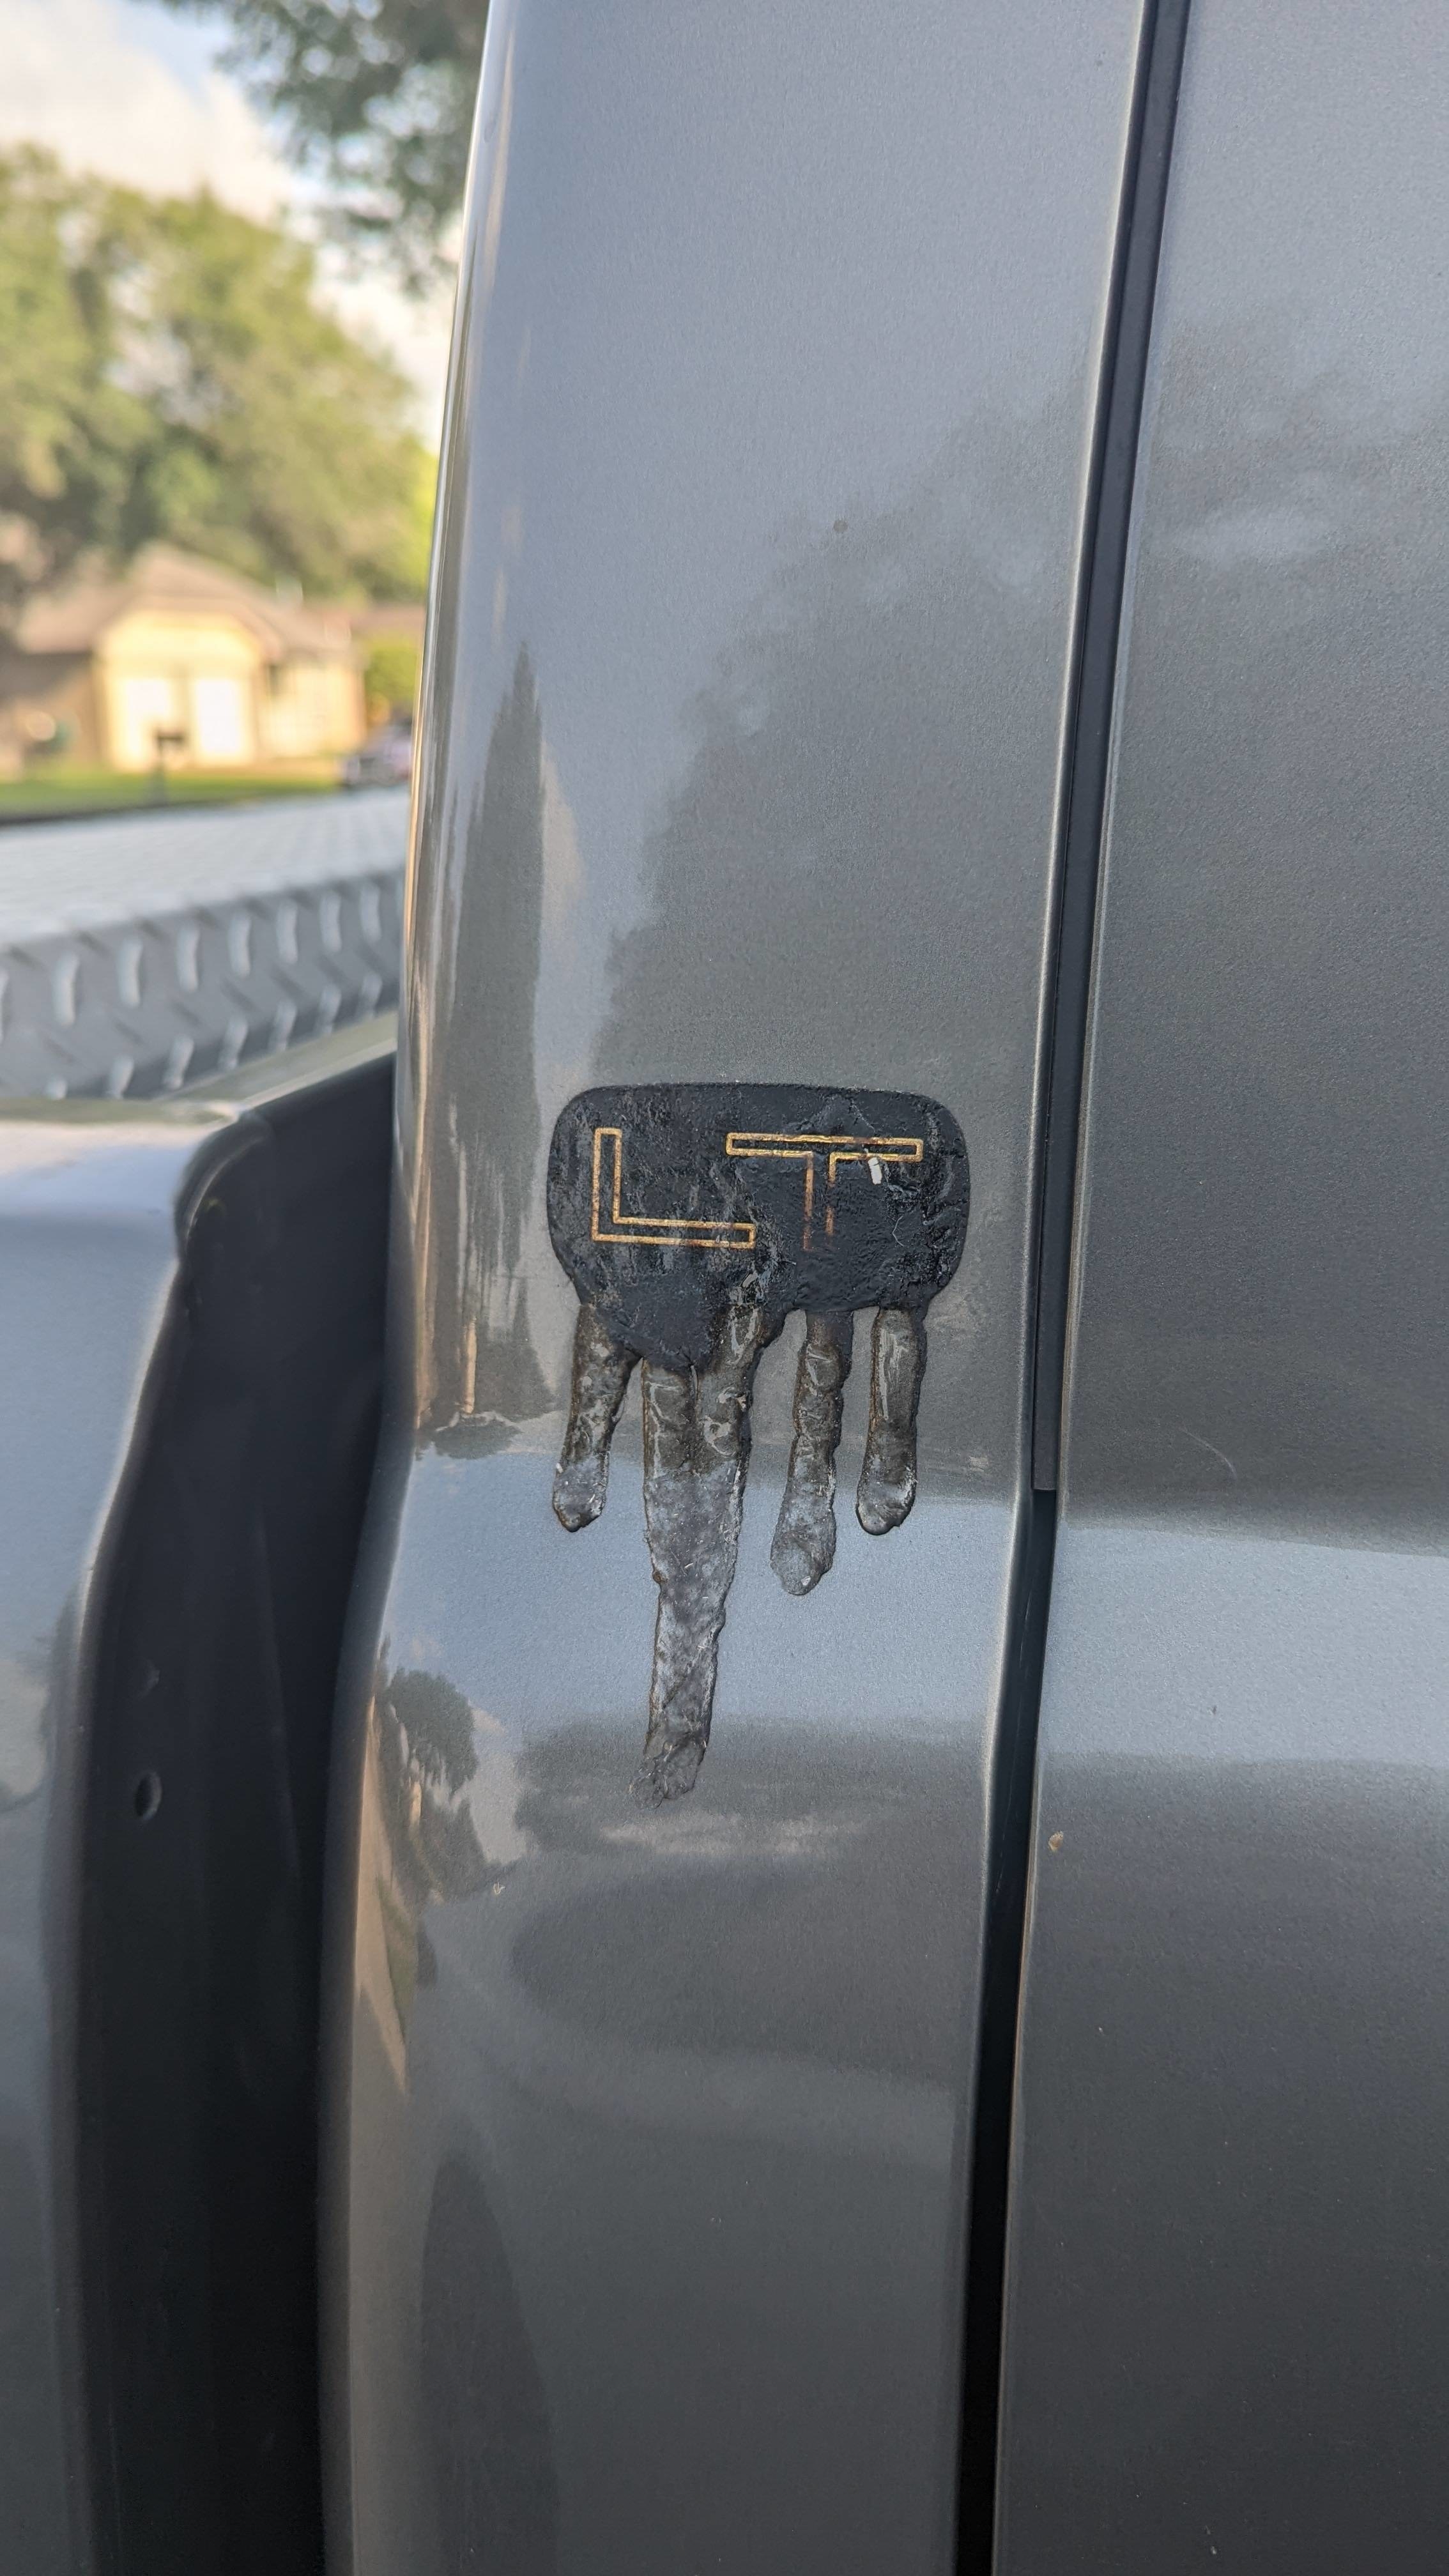 A melted logo on a truck